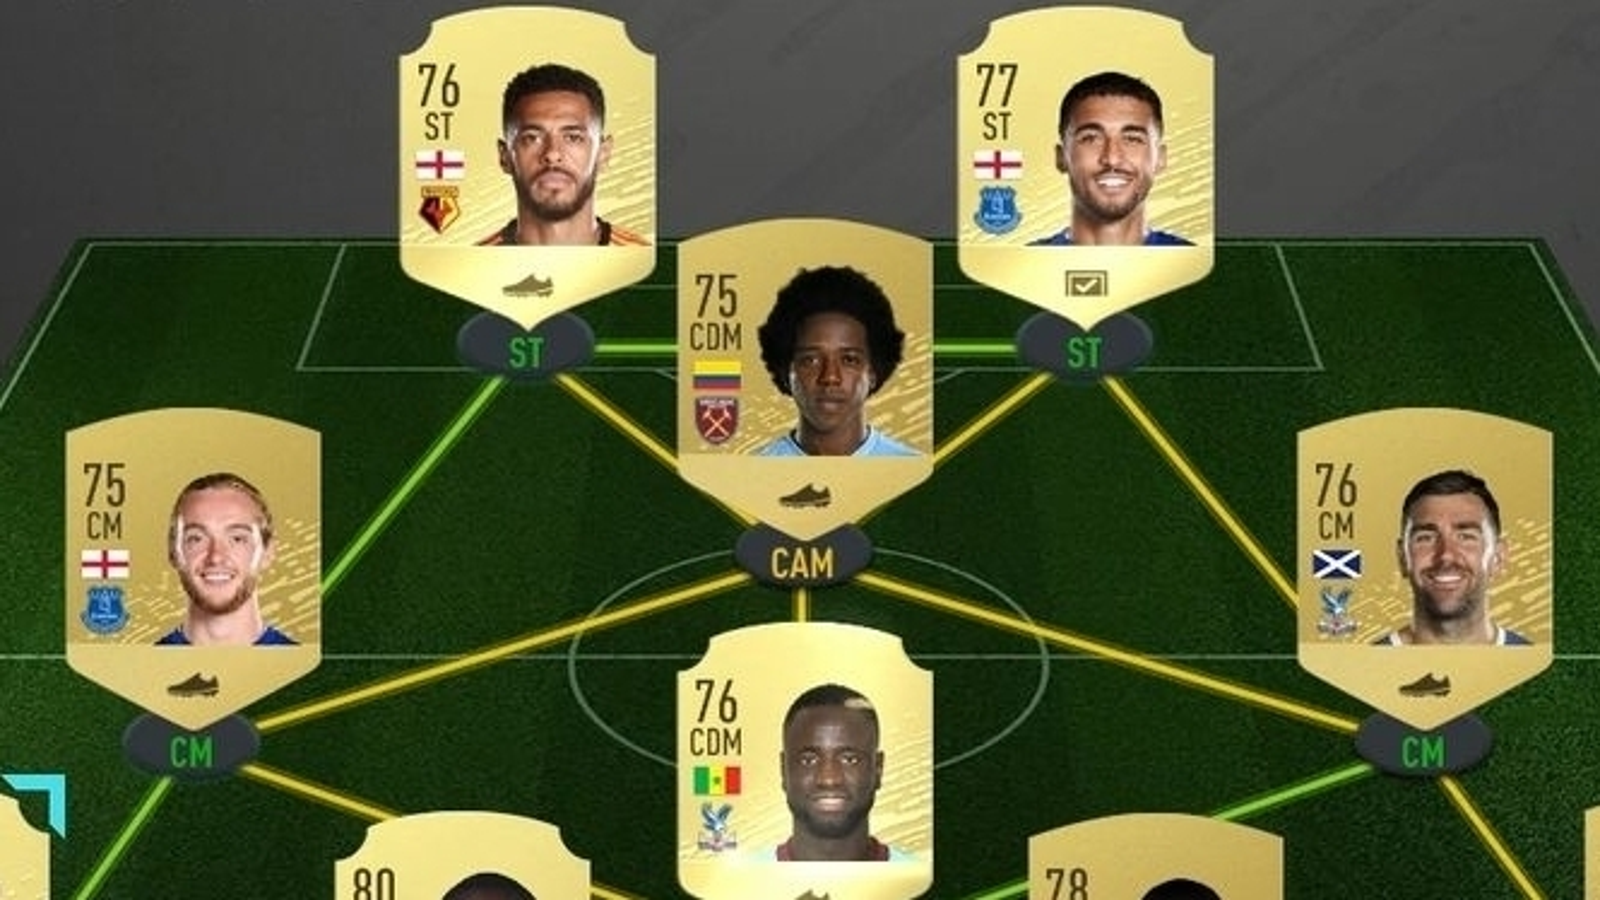 How To Make Coins Quickly In FIFA 20 Ultimate Team